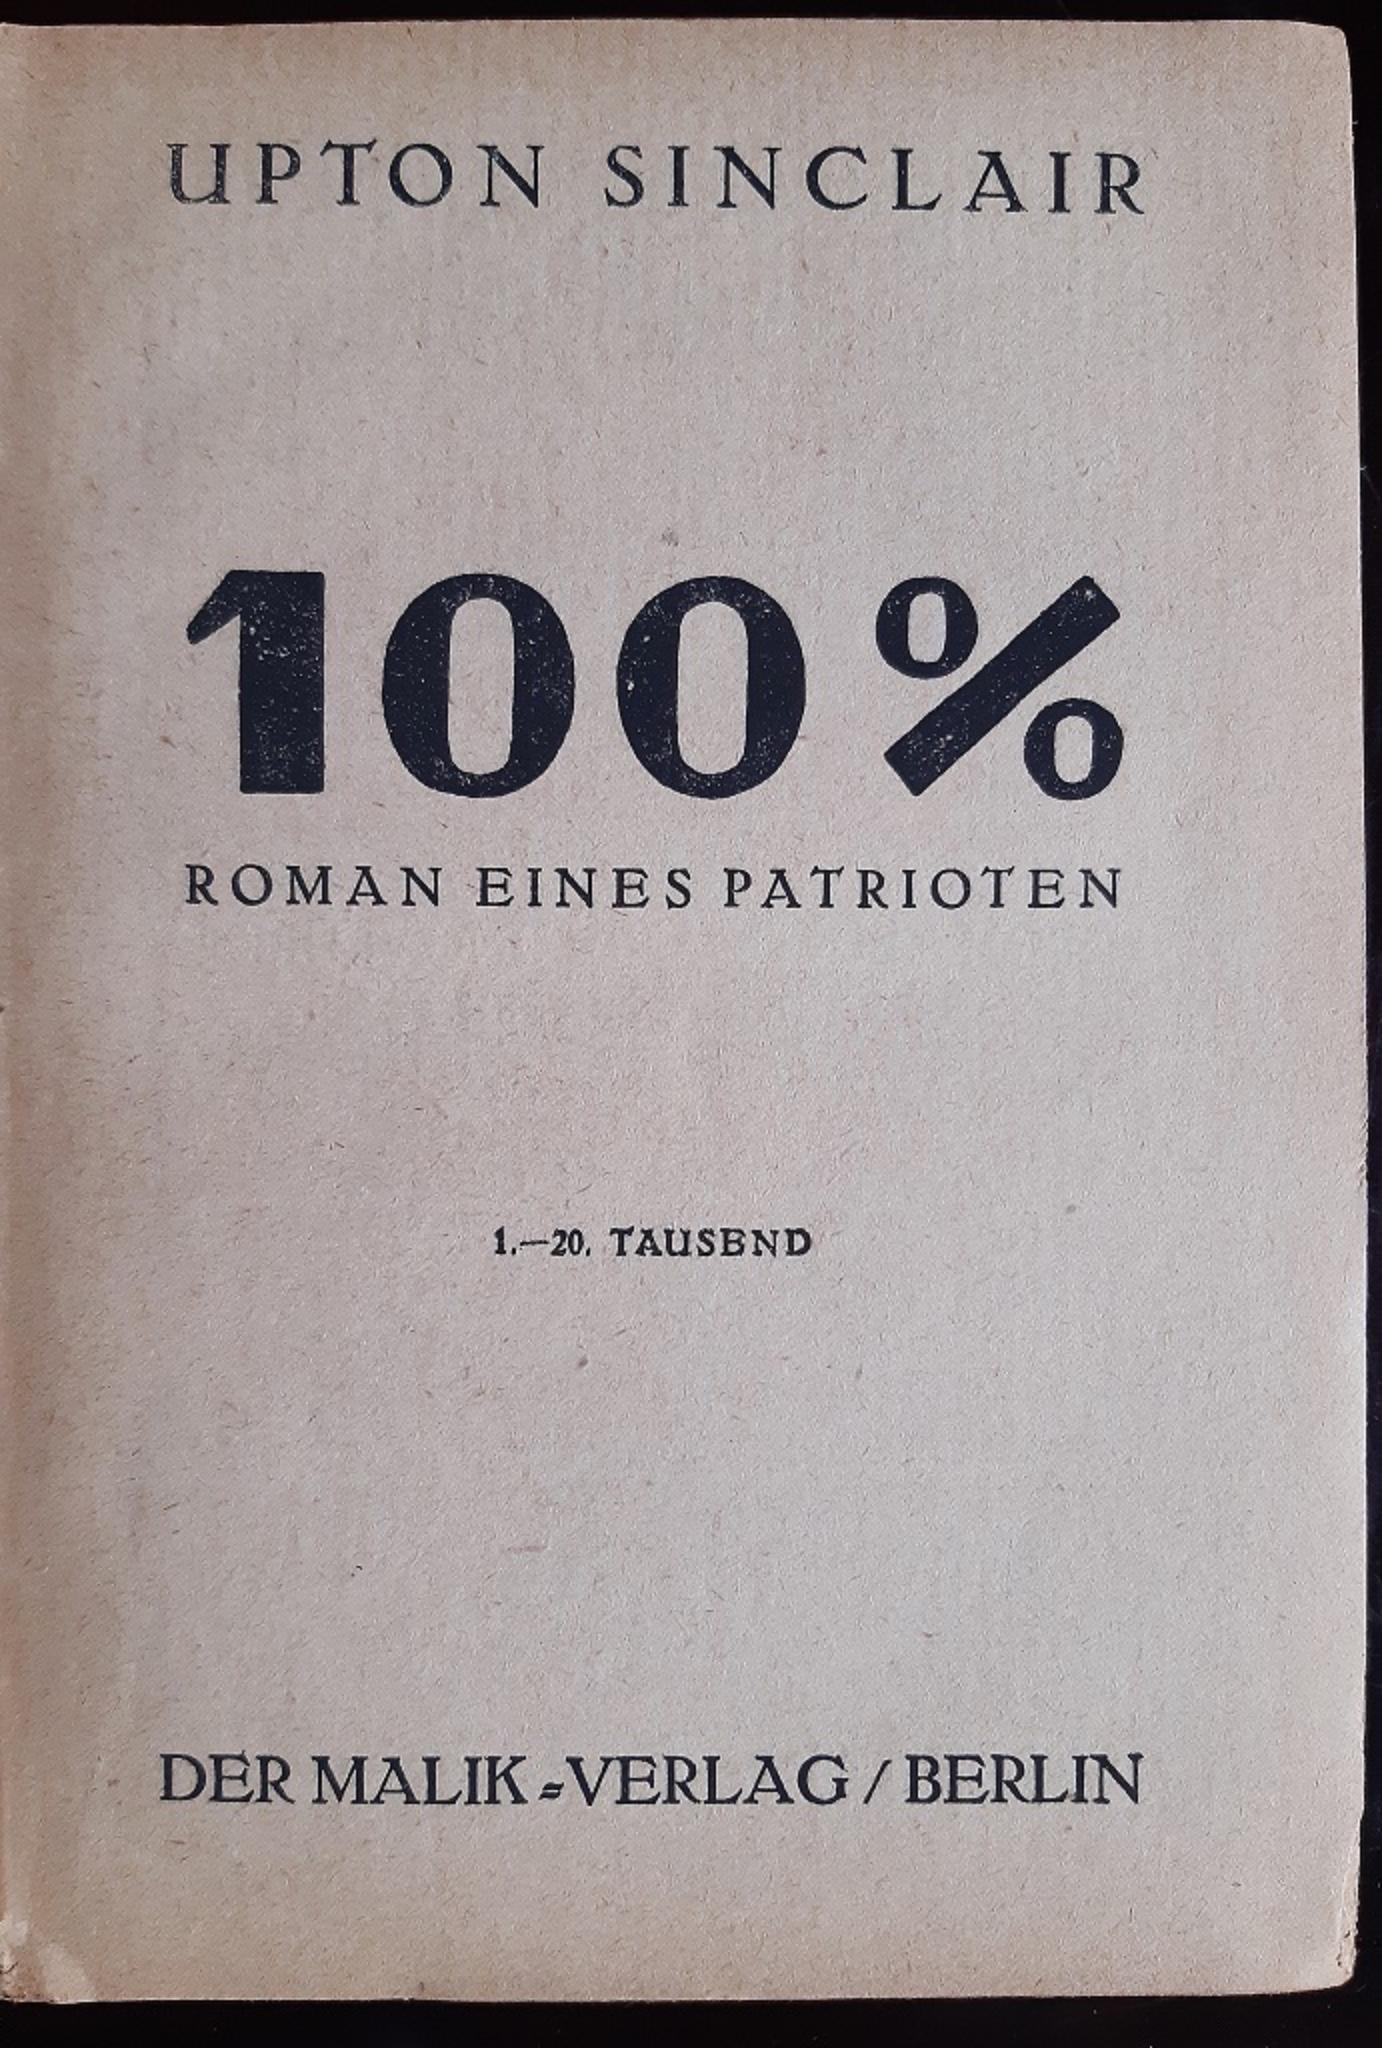 100% is an original Modern rare book  written by Upton Beall Sinclair (Baltimora, 1878 – Bound Brook, 1968) and illustrated by George Grosz (Berlin, 1823 - 1959, Berlin)  in 1921.

Original First Edition.

Published by Malik, Berlin.

Format: Small